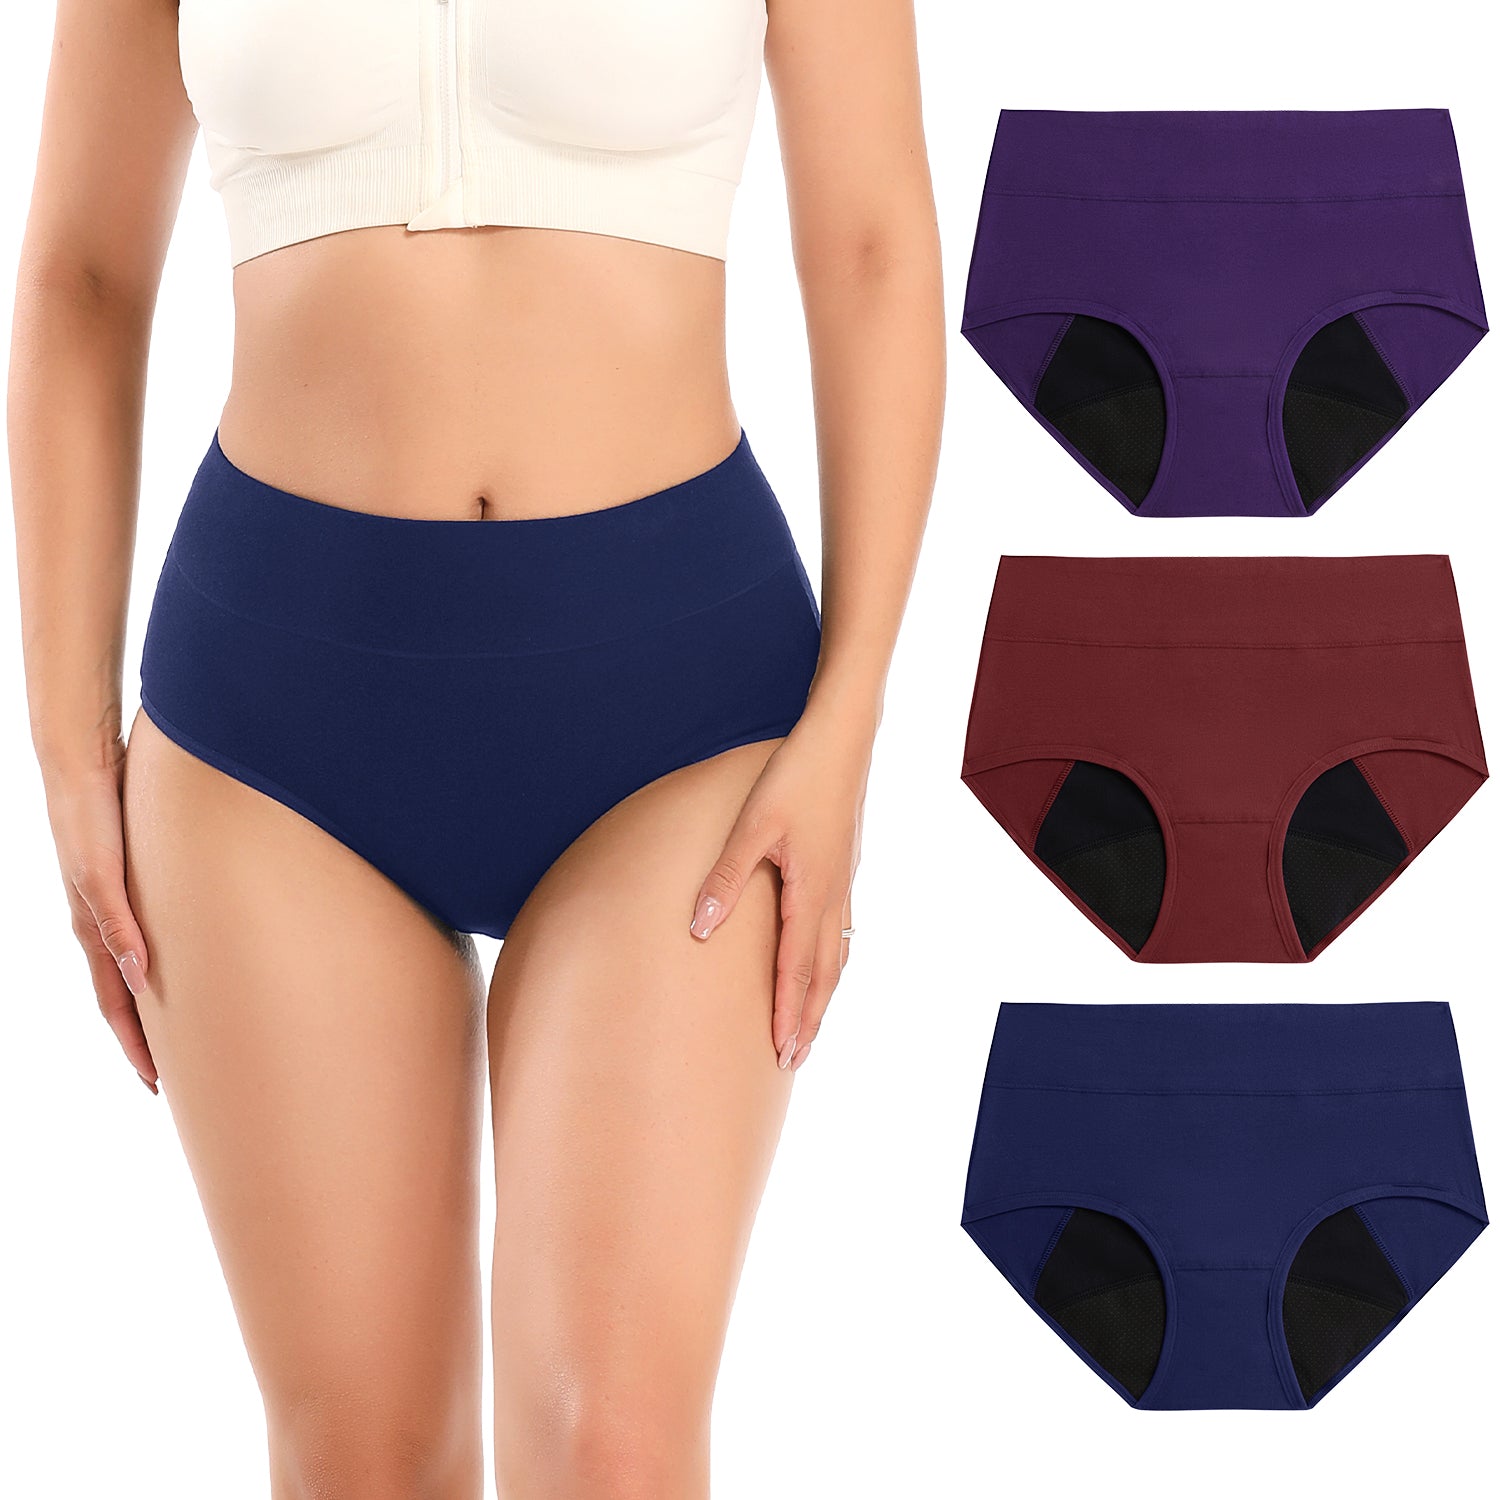 Molasus 4 Pack of Cotton Rich High Waist Womans Full Briefs Size